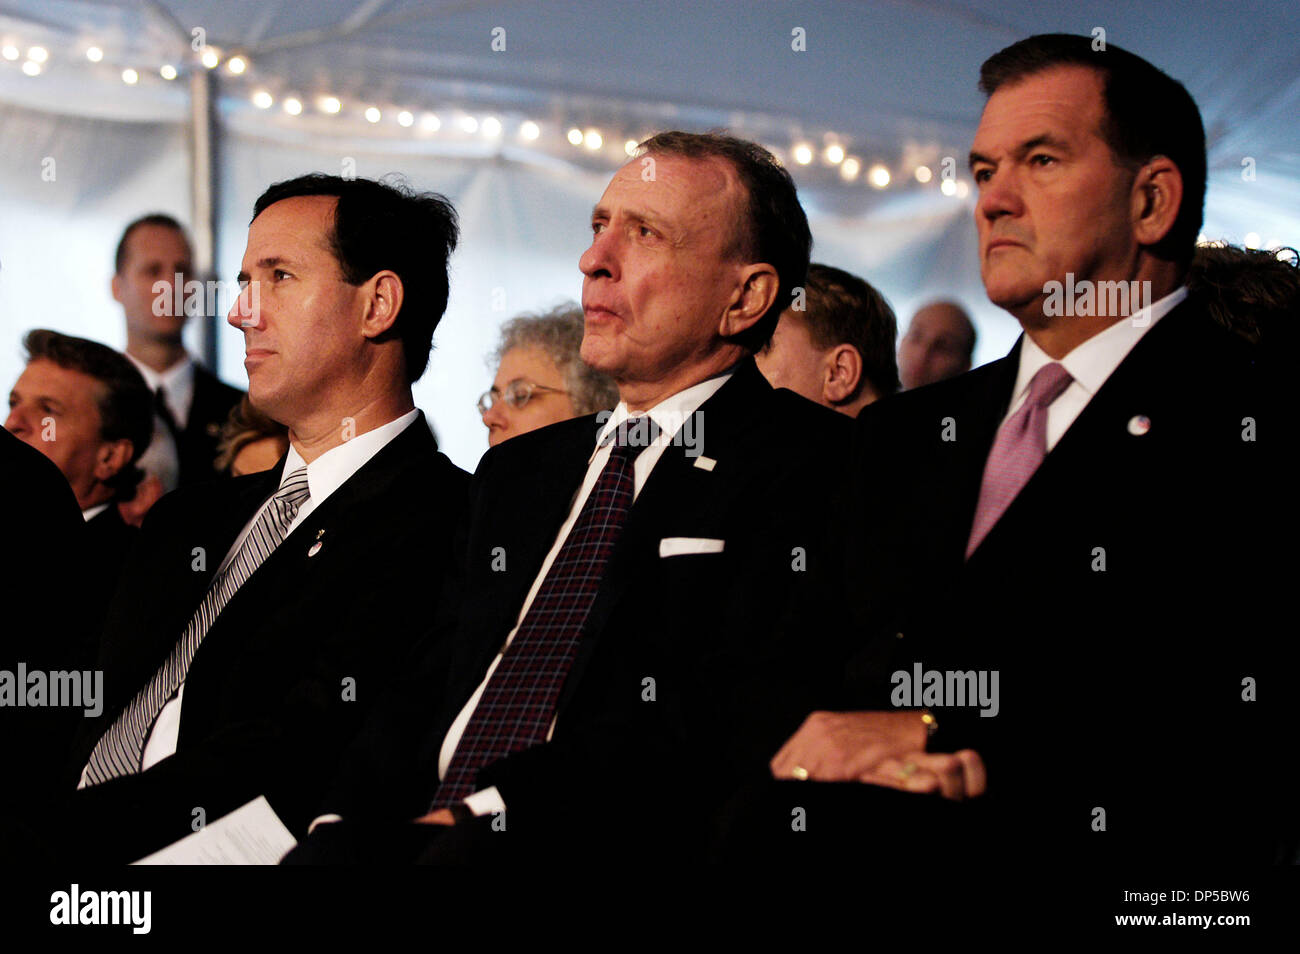 Sep 11, 2006; Shanksville, PA, USA; US Senator RICK SANTORUM (R-PA), US Senator ARLEN SPECTER (R-PA) AND Former PA Governor TOM RIDGE at the 5th anniversary of United Flight 93 on 9/11 a temporary memorial was set up for United Flight 93, that was thwarted by hijackers and crashed in a grassy field on September 11, 2001 in Shanksville, PA, 80 miles south of Pittsburgh.           Ma Stock Photo